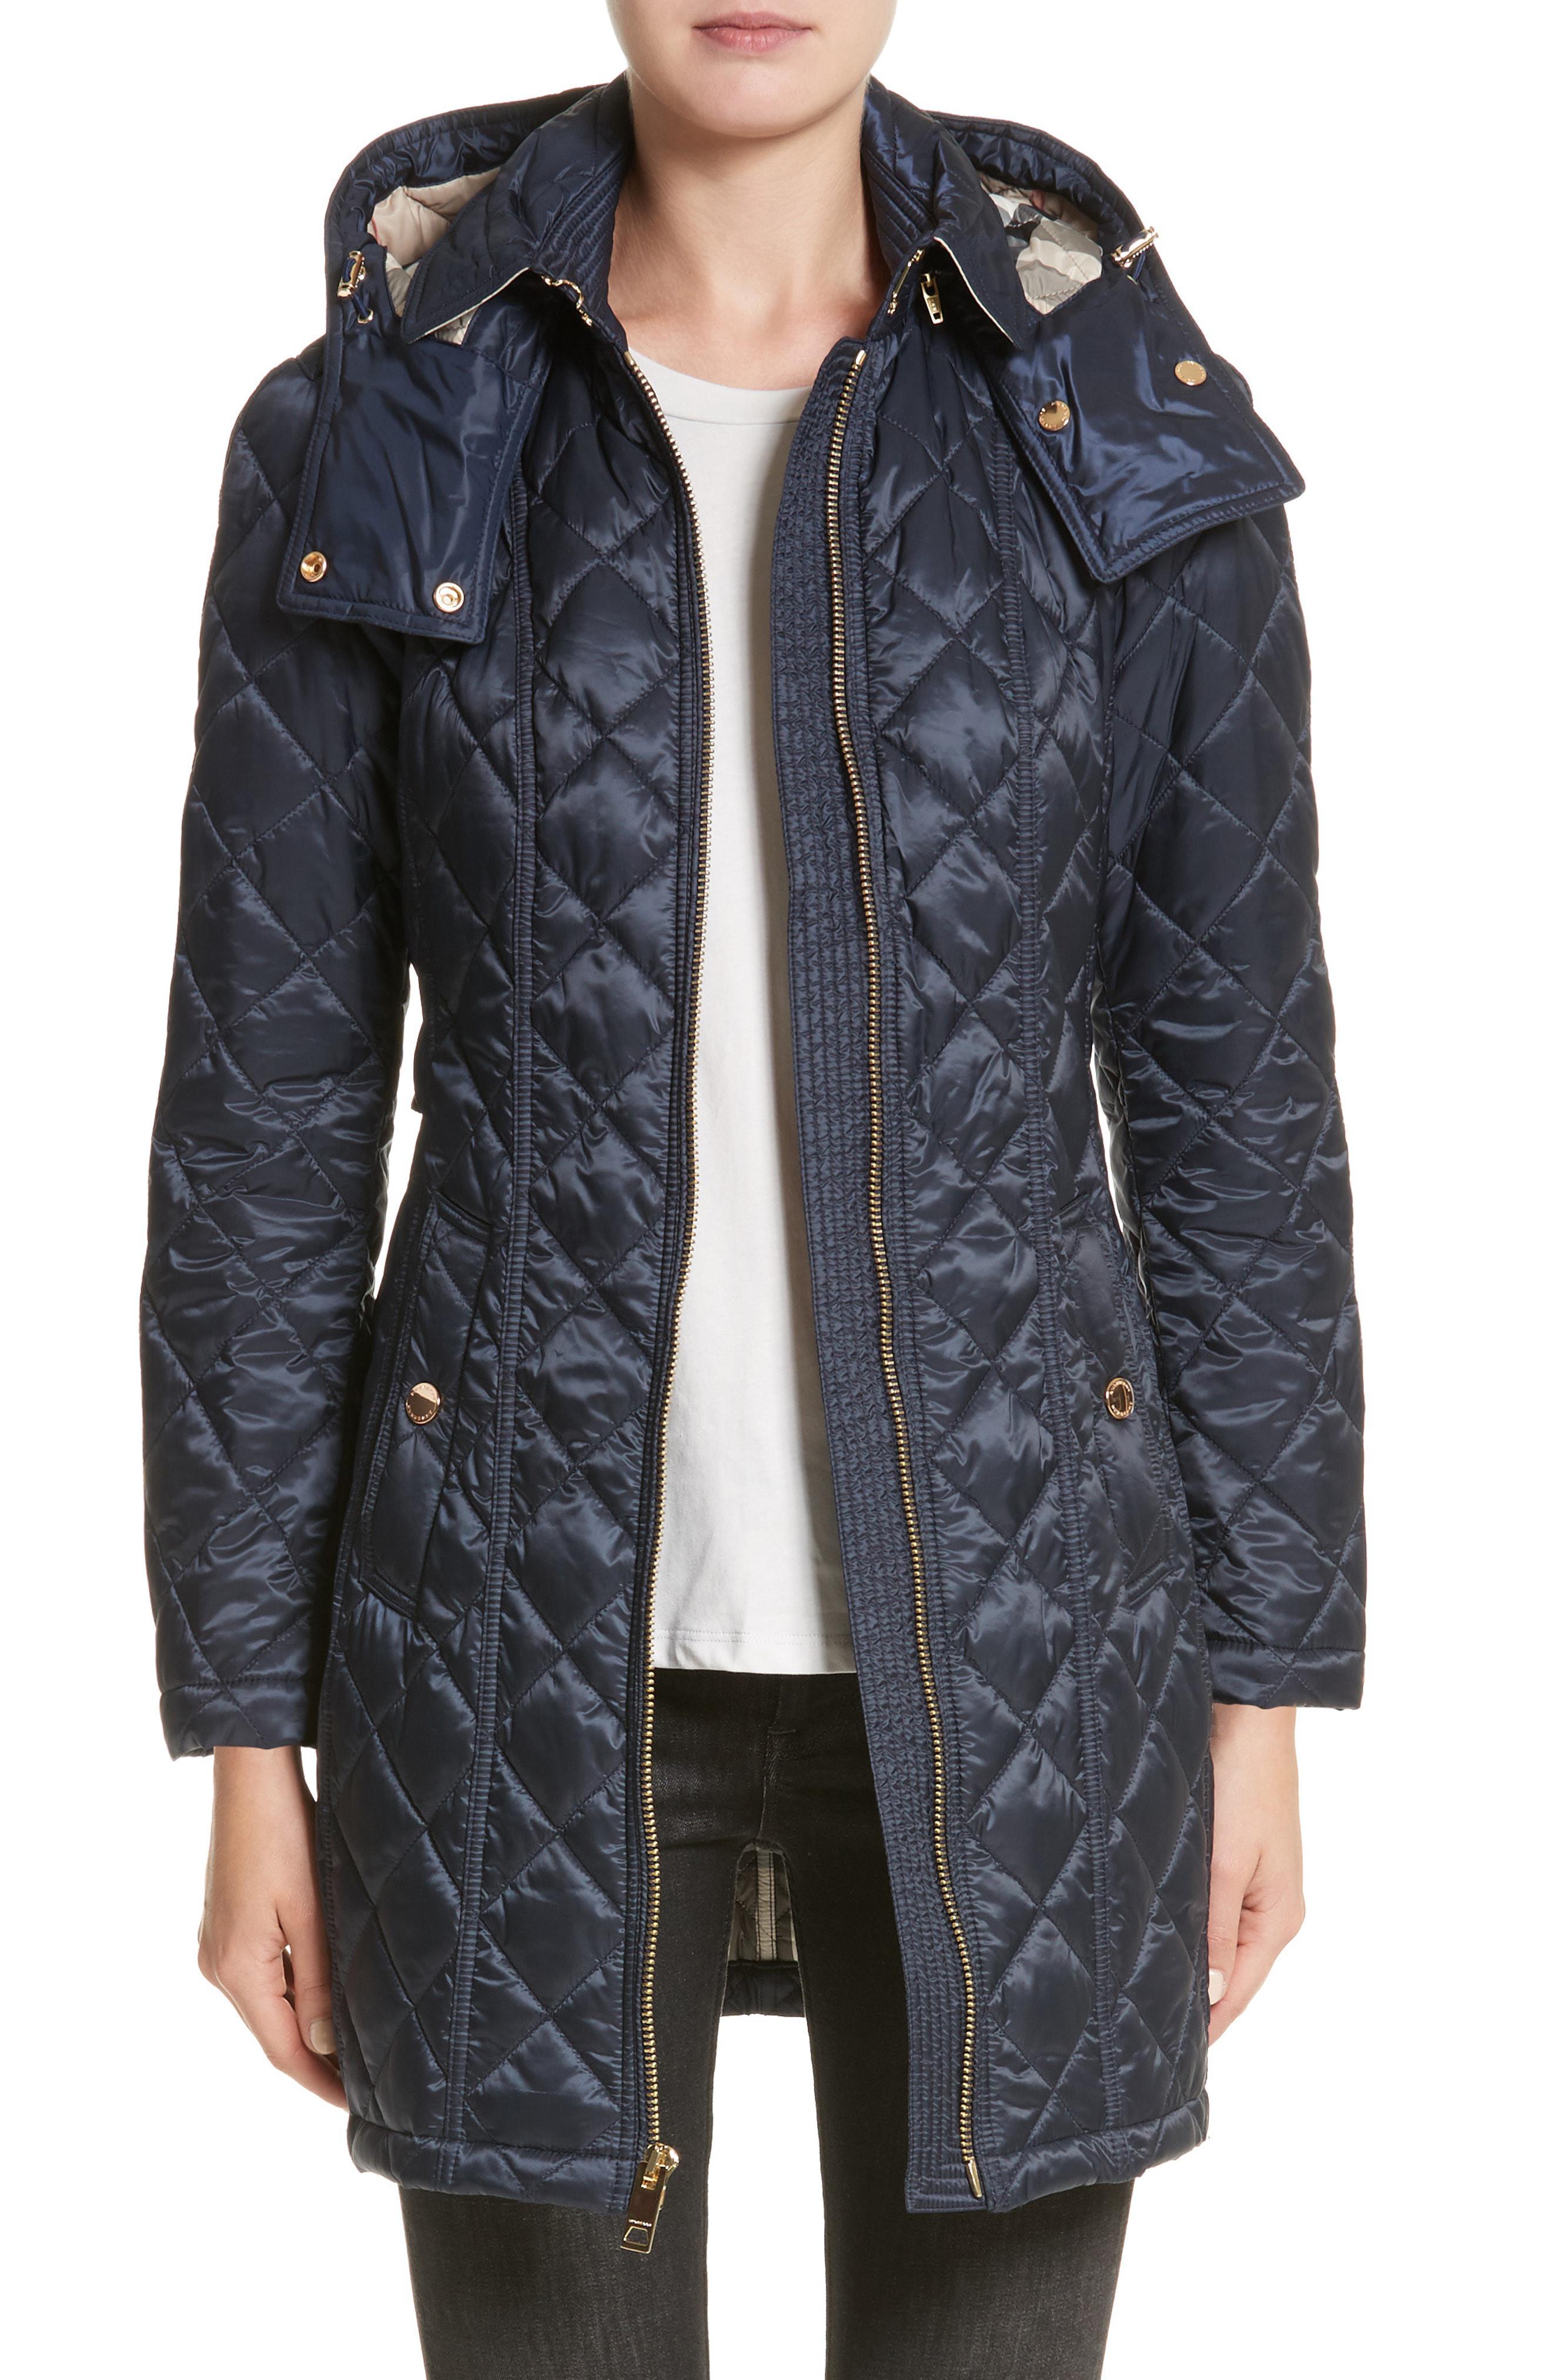 burberry baughton quilted jacket